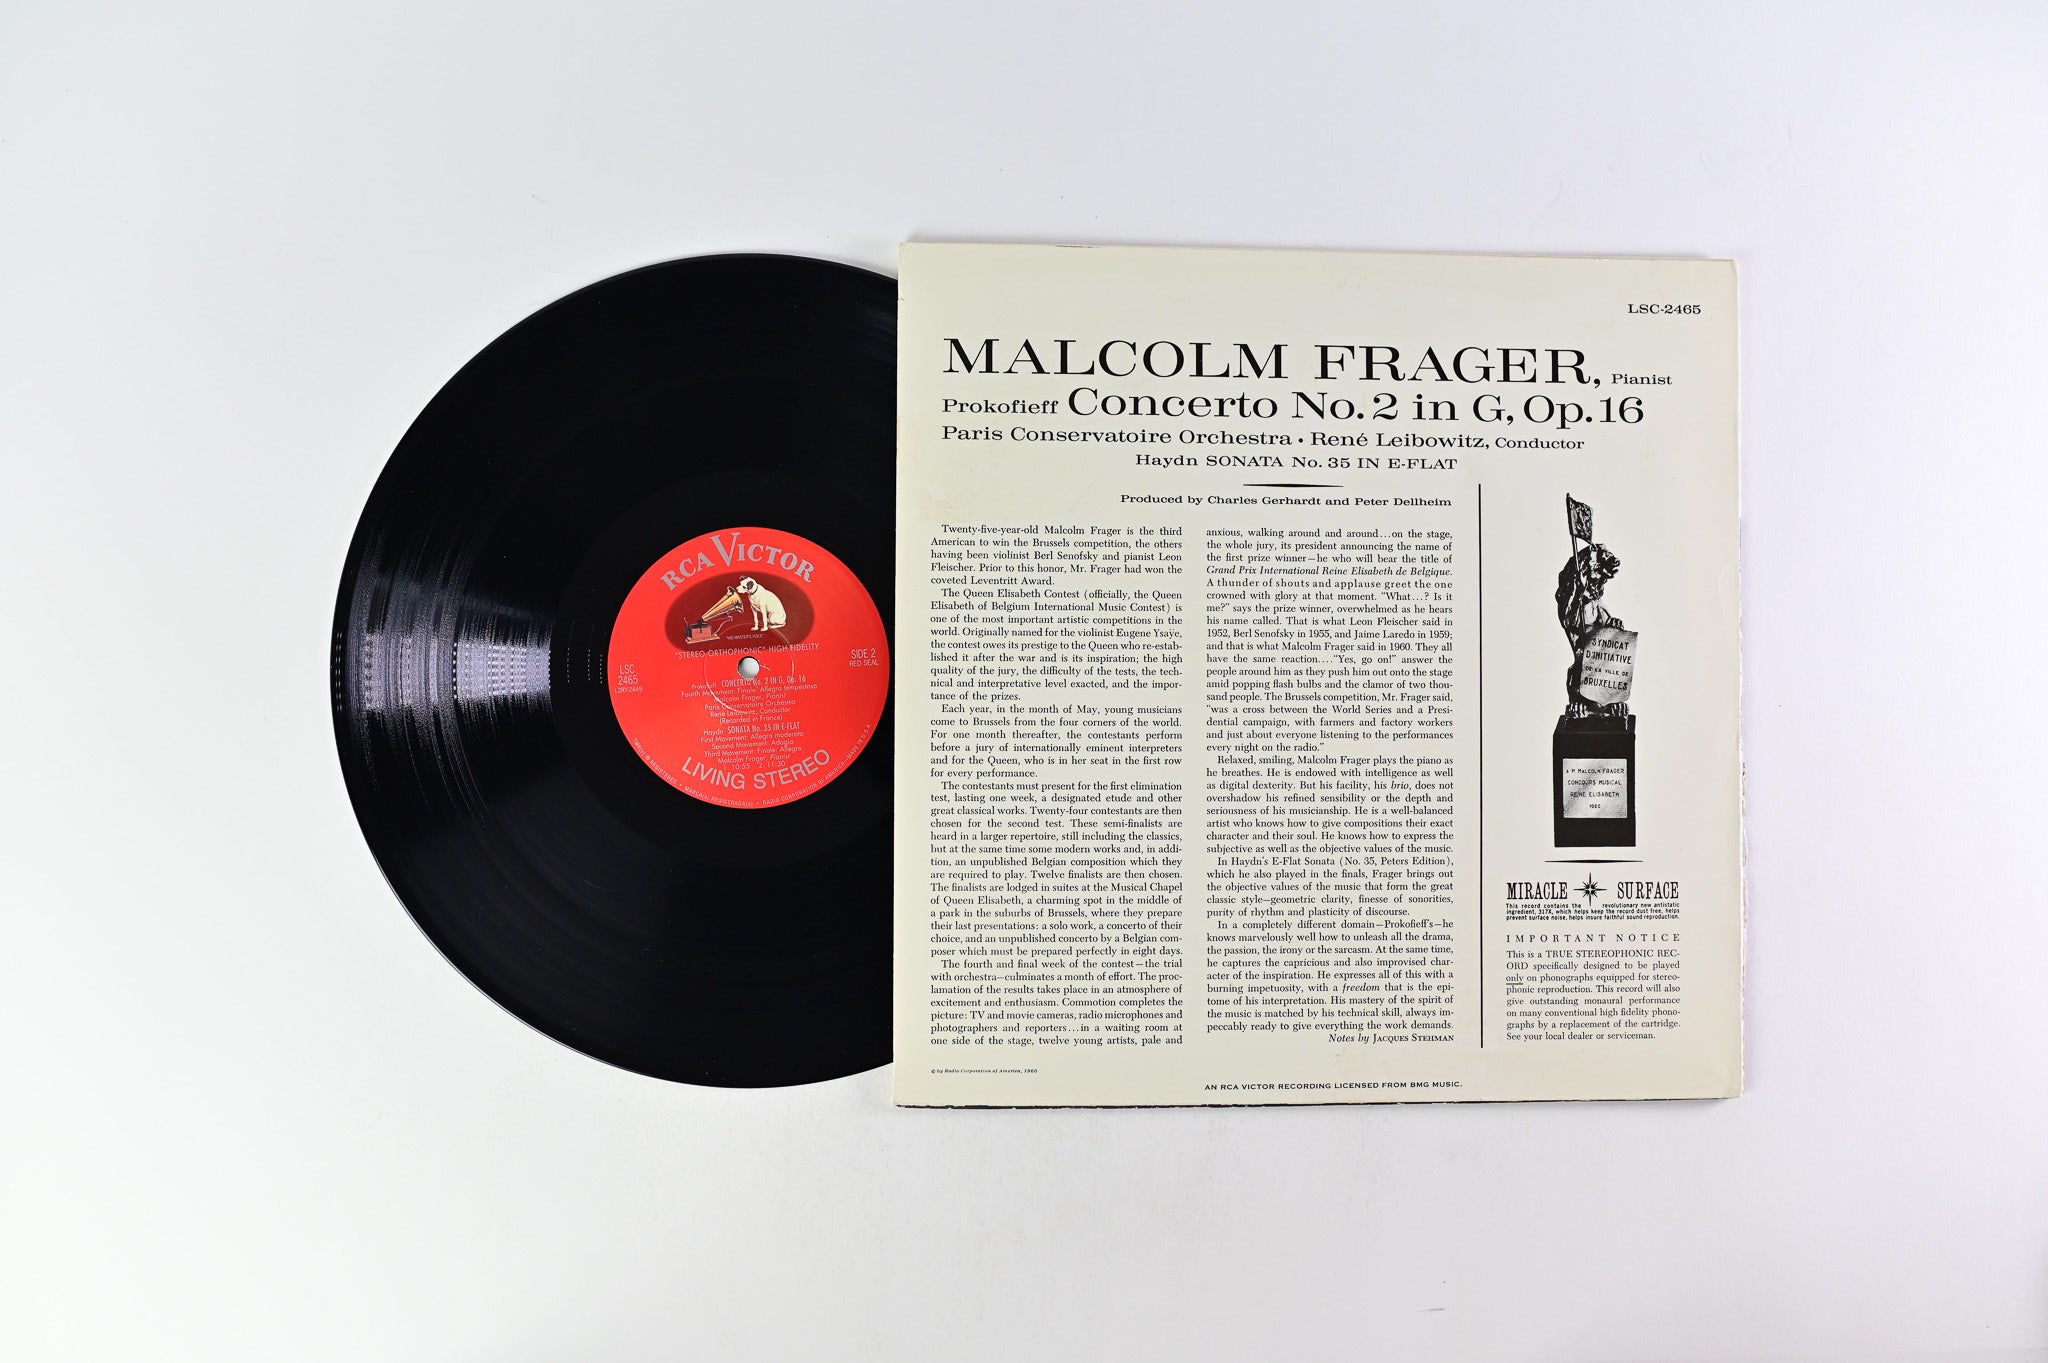 Malcolm Frager - Prokofieff Concerto No. 2 Reissue on Classic Records